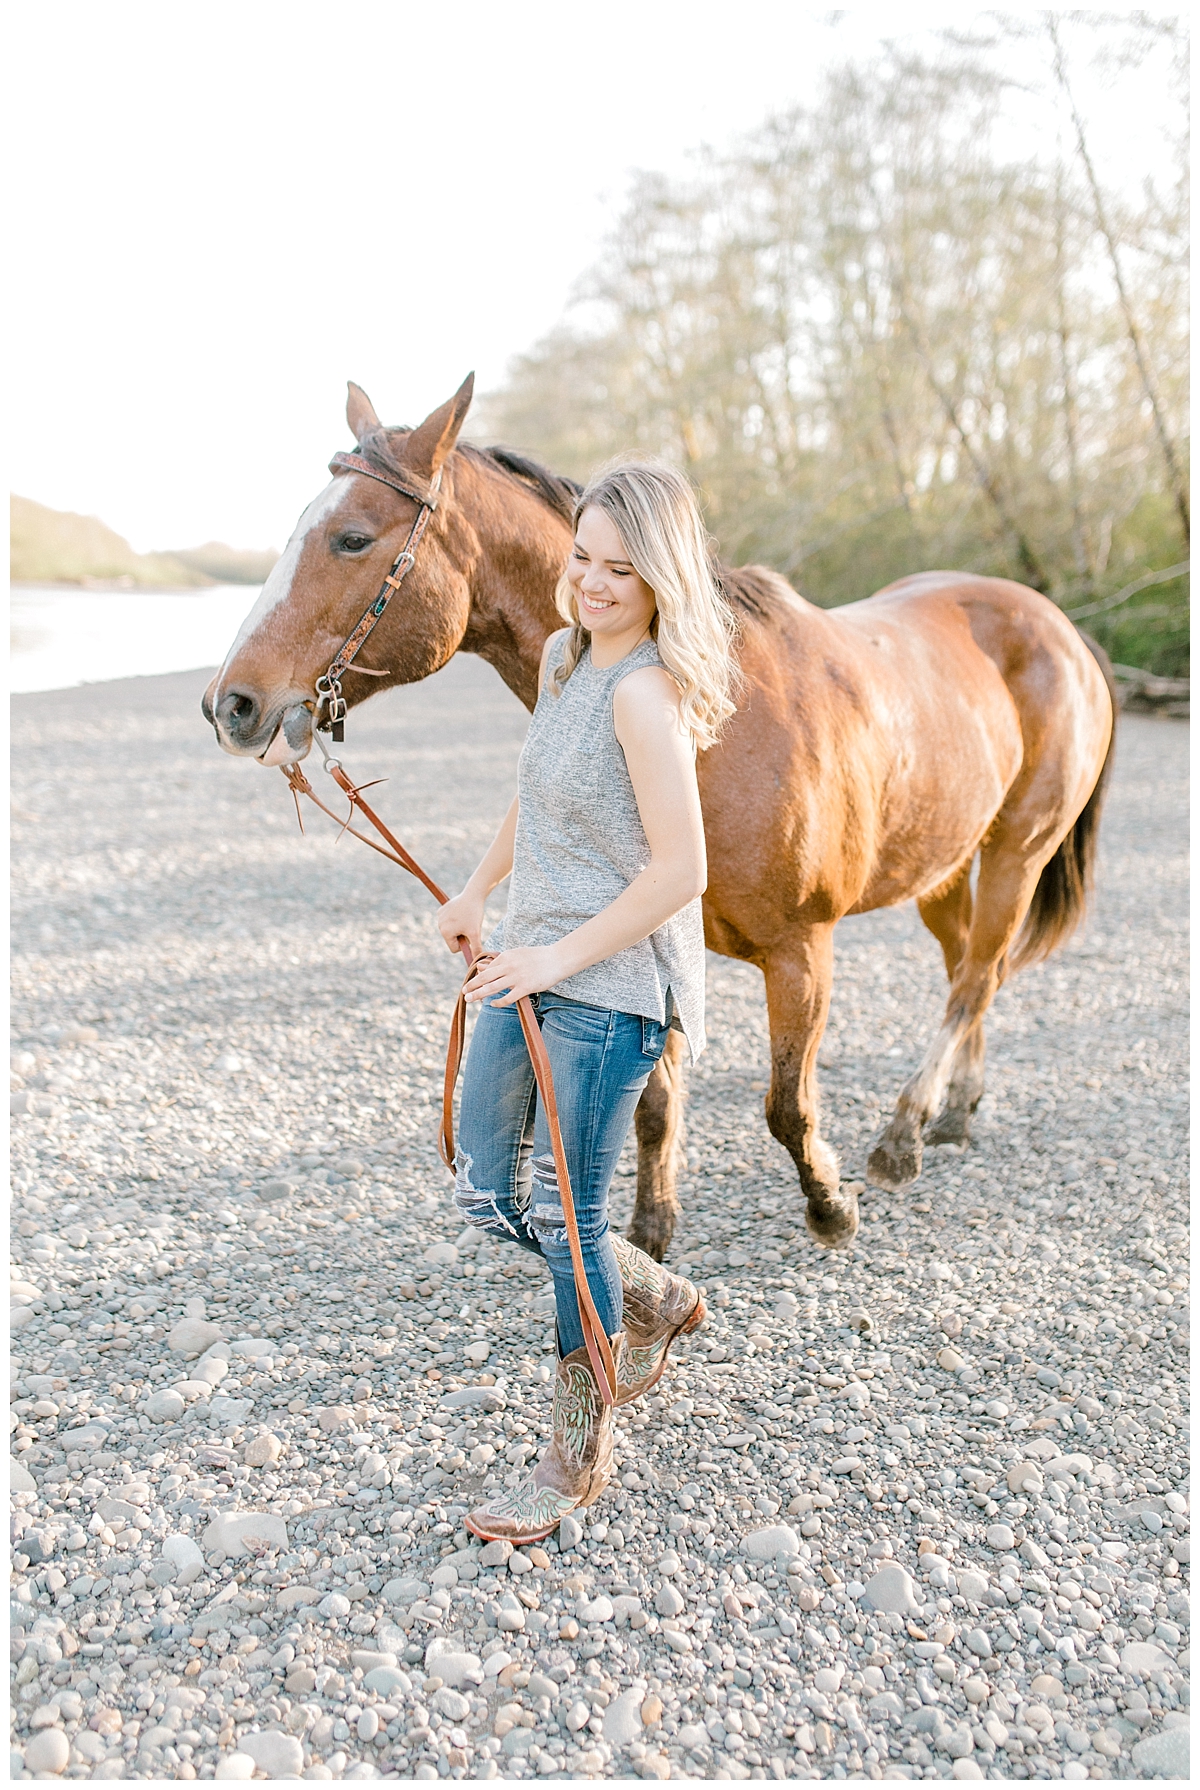 Sunset Senior Session with Horse | Senior Session Inspiration Session | Horse Photo Session | Pacific Northwest Light and Airy Wedding and Portrait Photographer | Emma Rose Company | Kindred Presets Walking with Horse.jpg